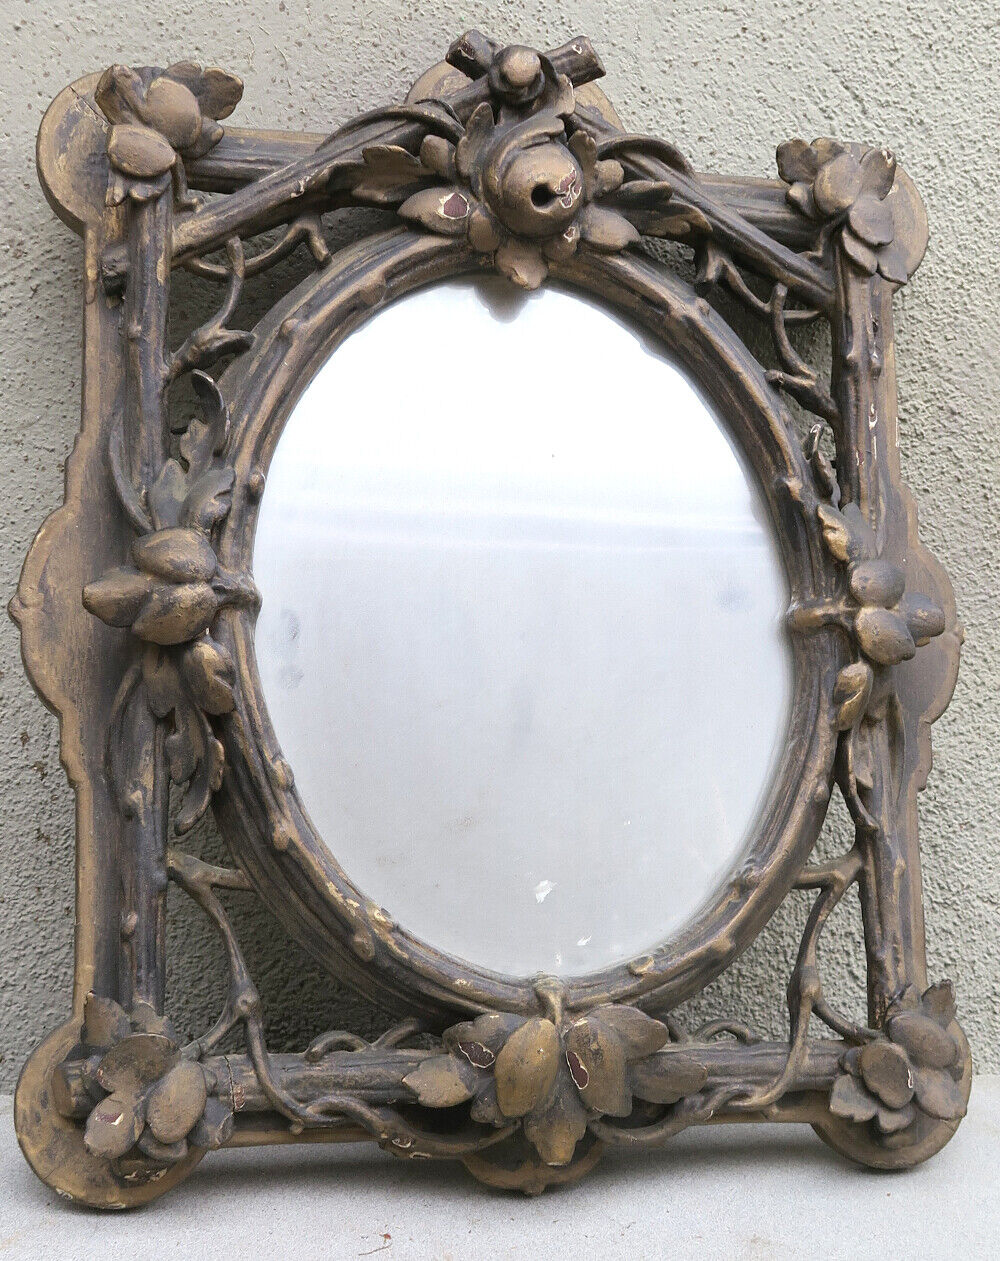 Antique 19C French Italy Gilt Mirror Frame Rose Carved for KPM plaque painting